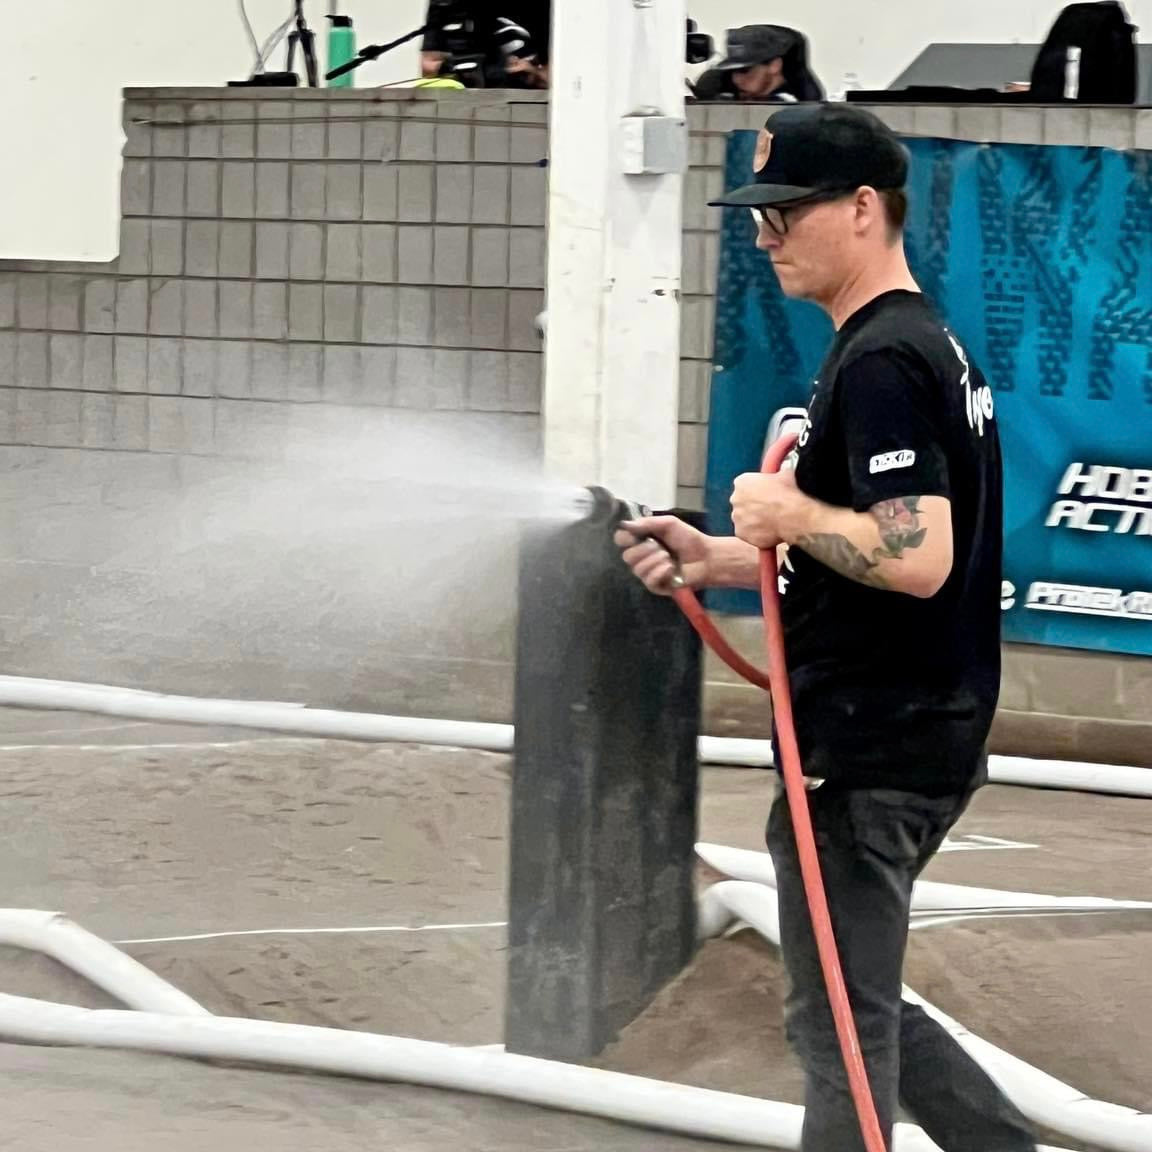 Jake Thayer with the TQ and Dialed Water Job at Hobby Action